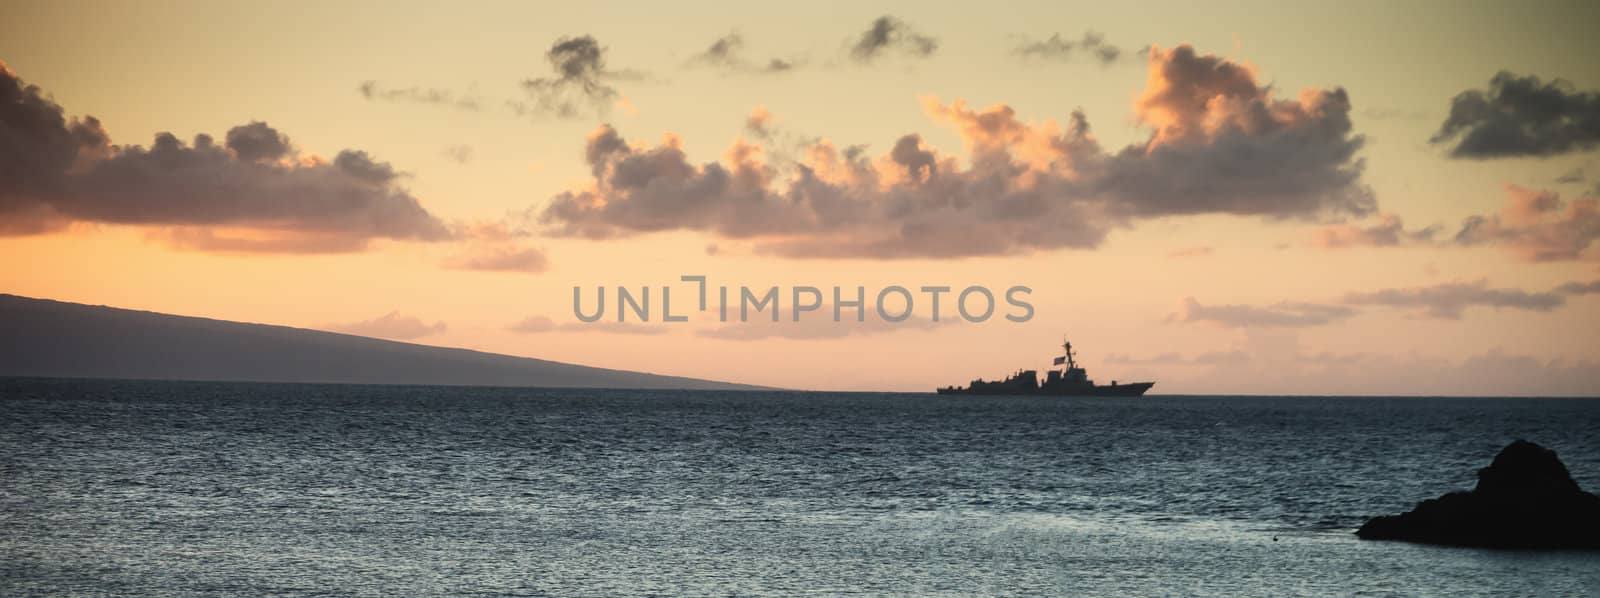 Us Navy Ship at Sunset by cvalle